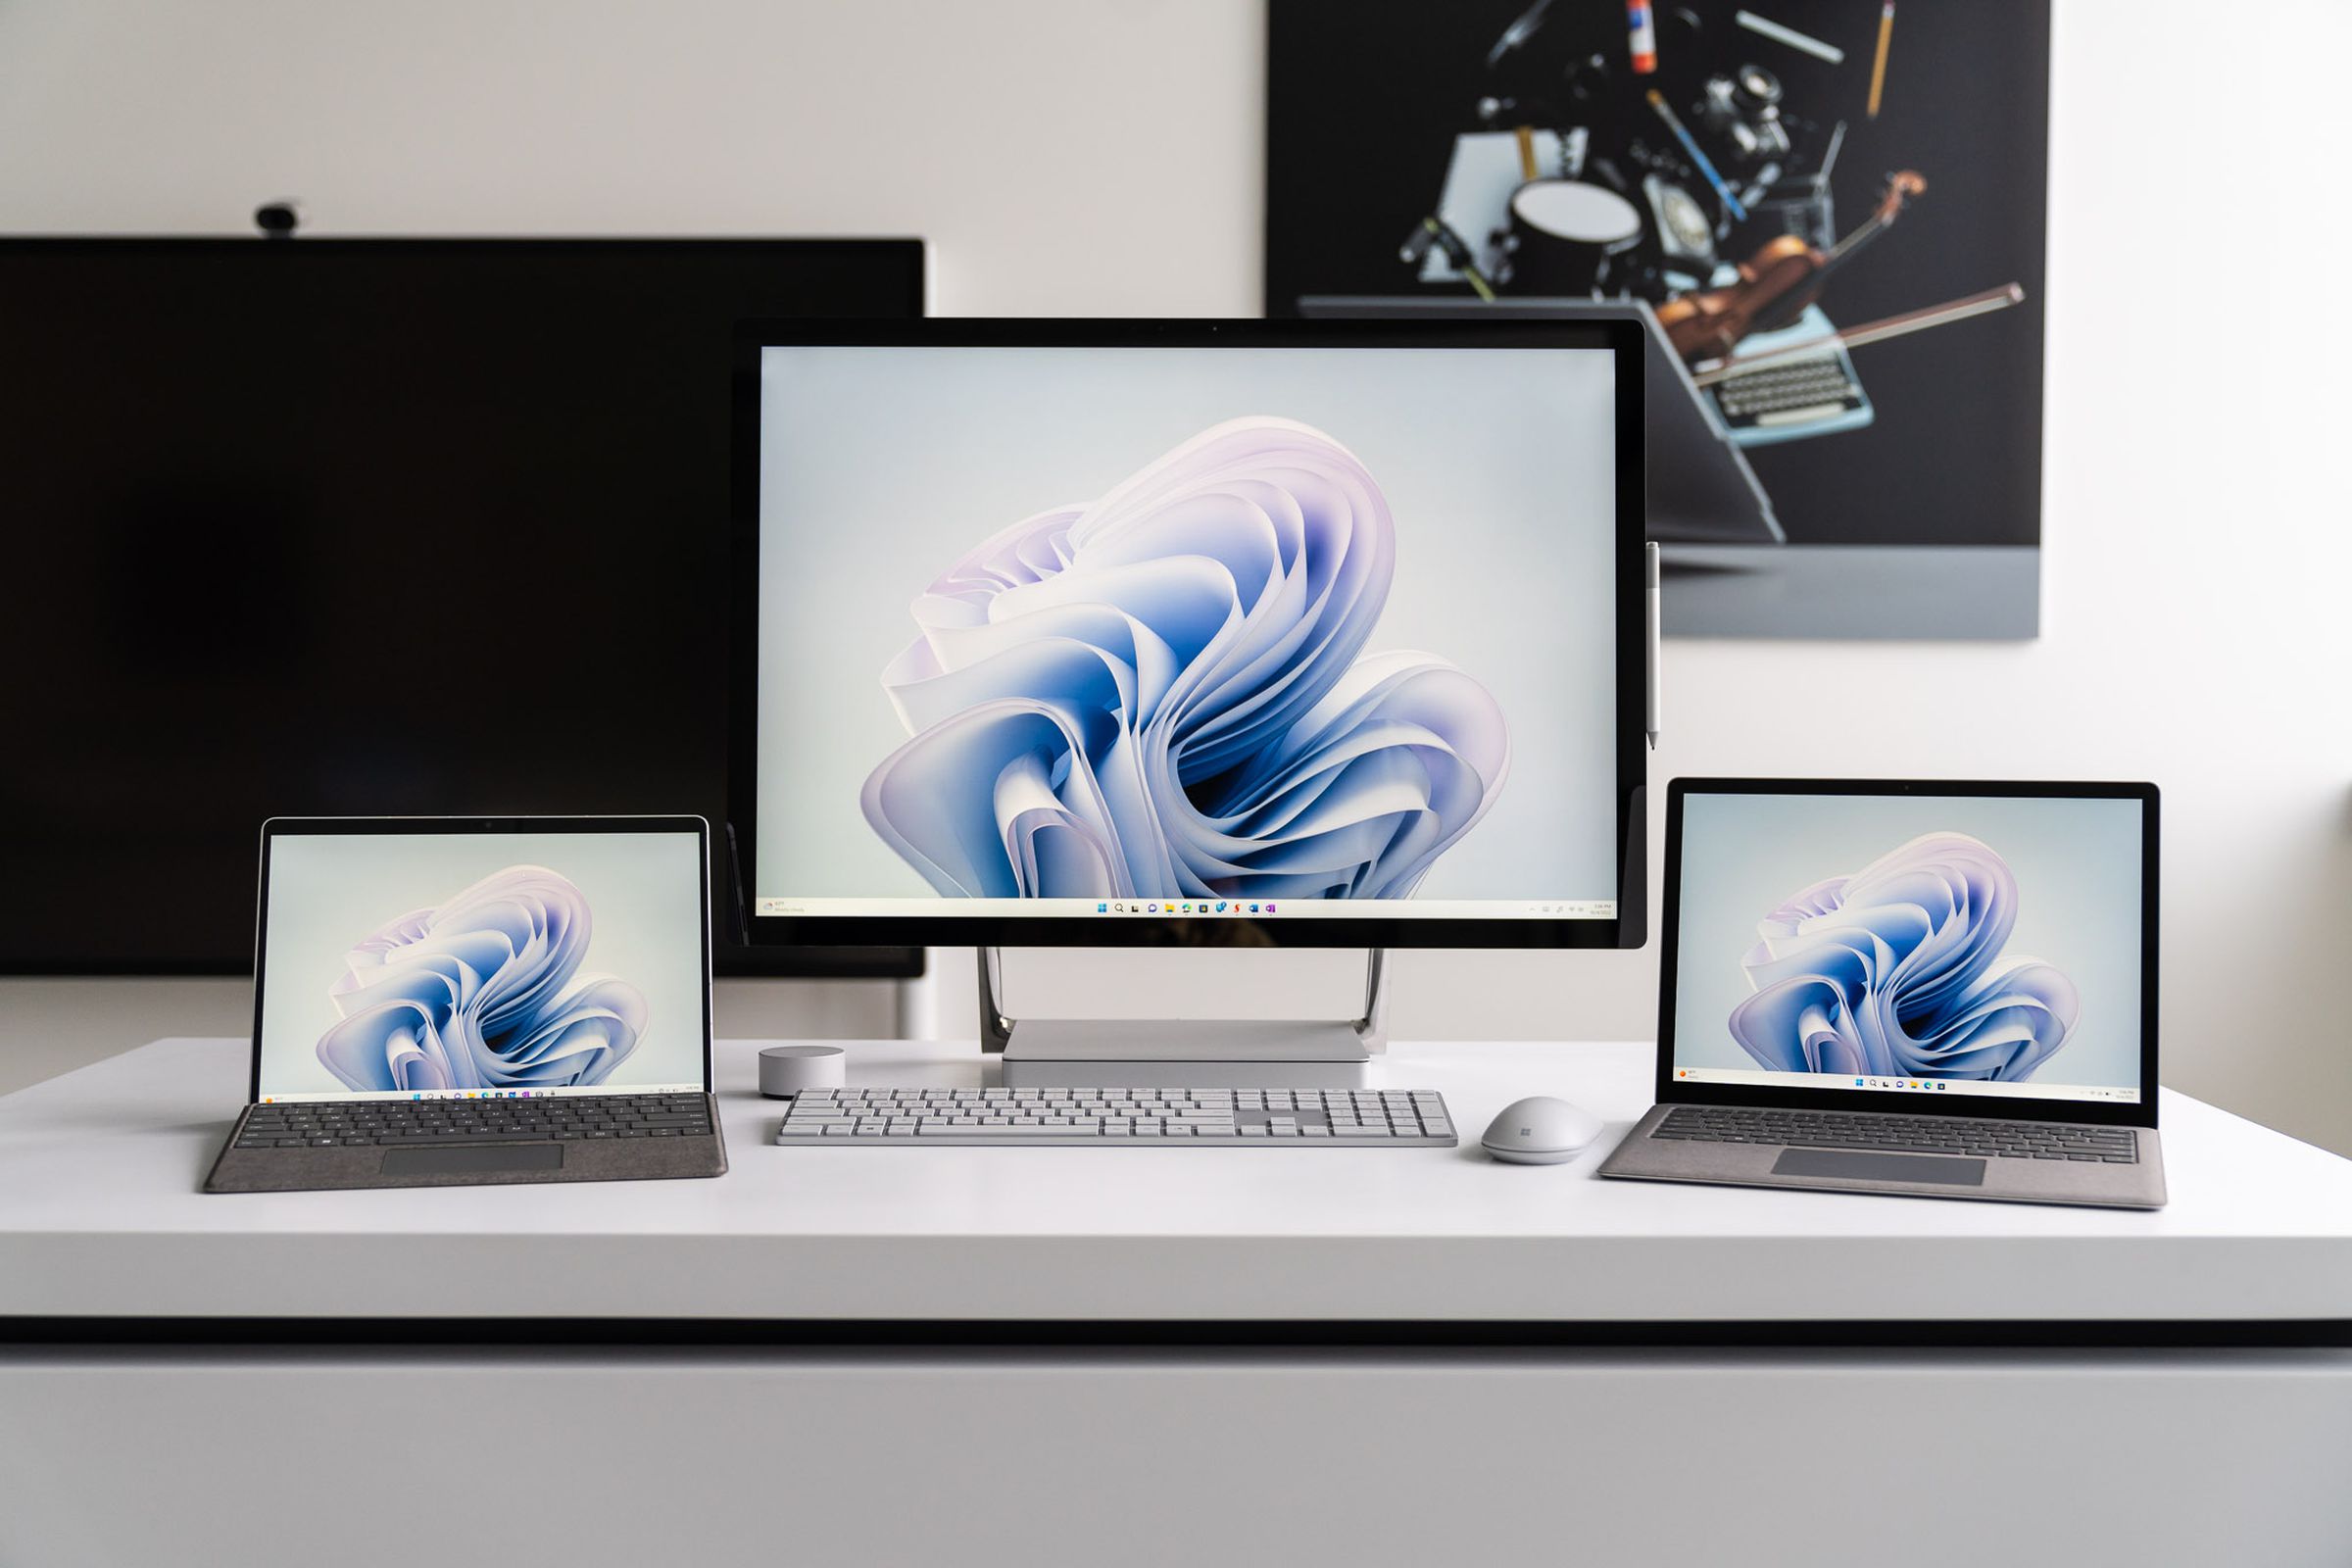 The 2022 Surface lineup includes the Surface Pro 9, Surface Studio 2 Plus, and Surface Laptop 5.